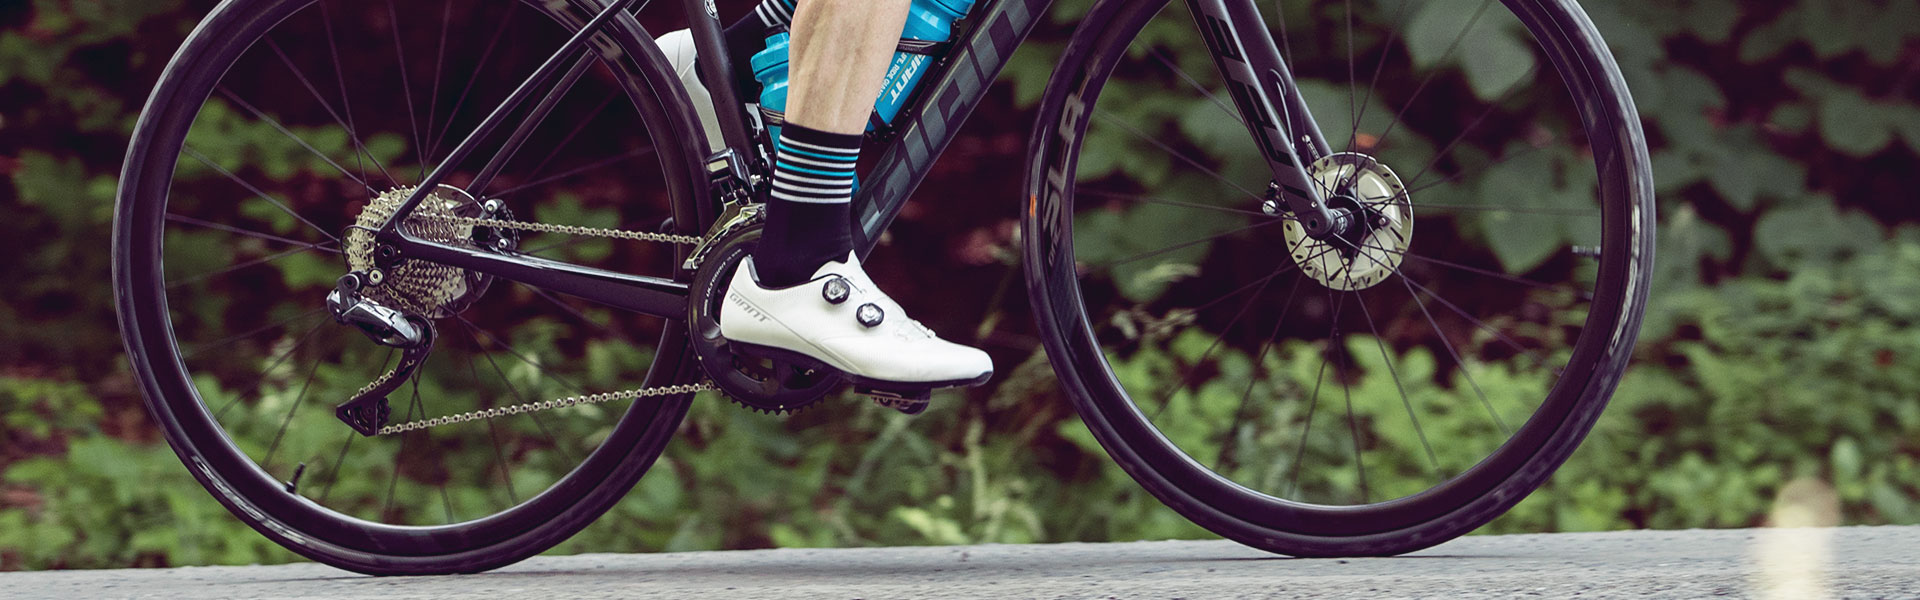 giant surge pro cycling shoes